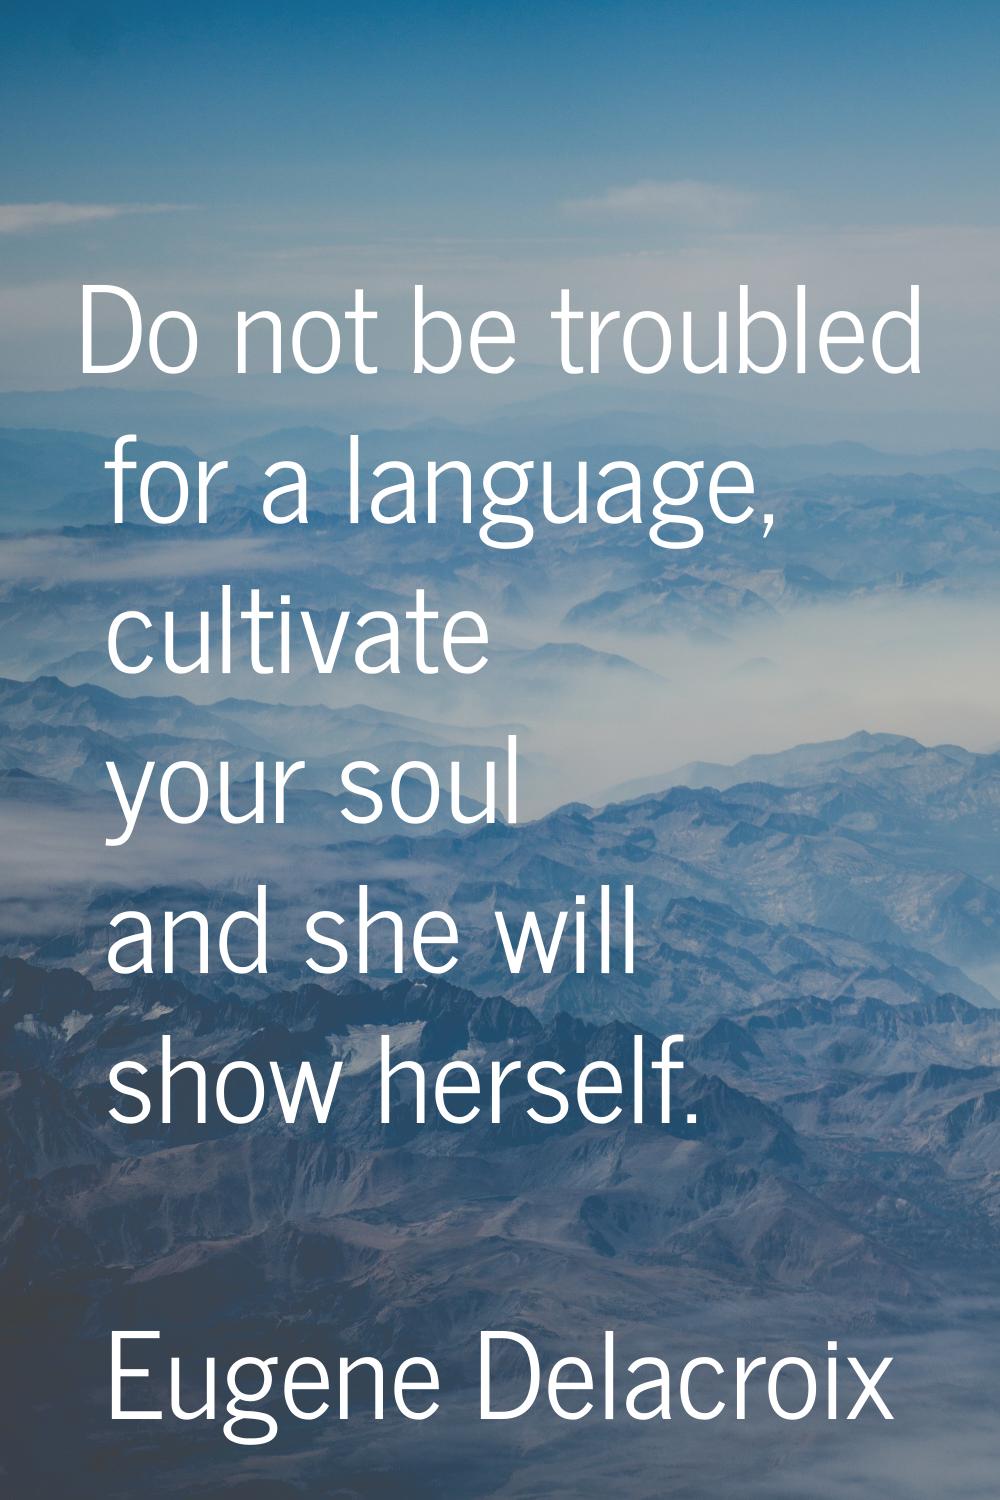 Do not be troubled for a language, cultivate your soul and she will show herself.